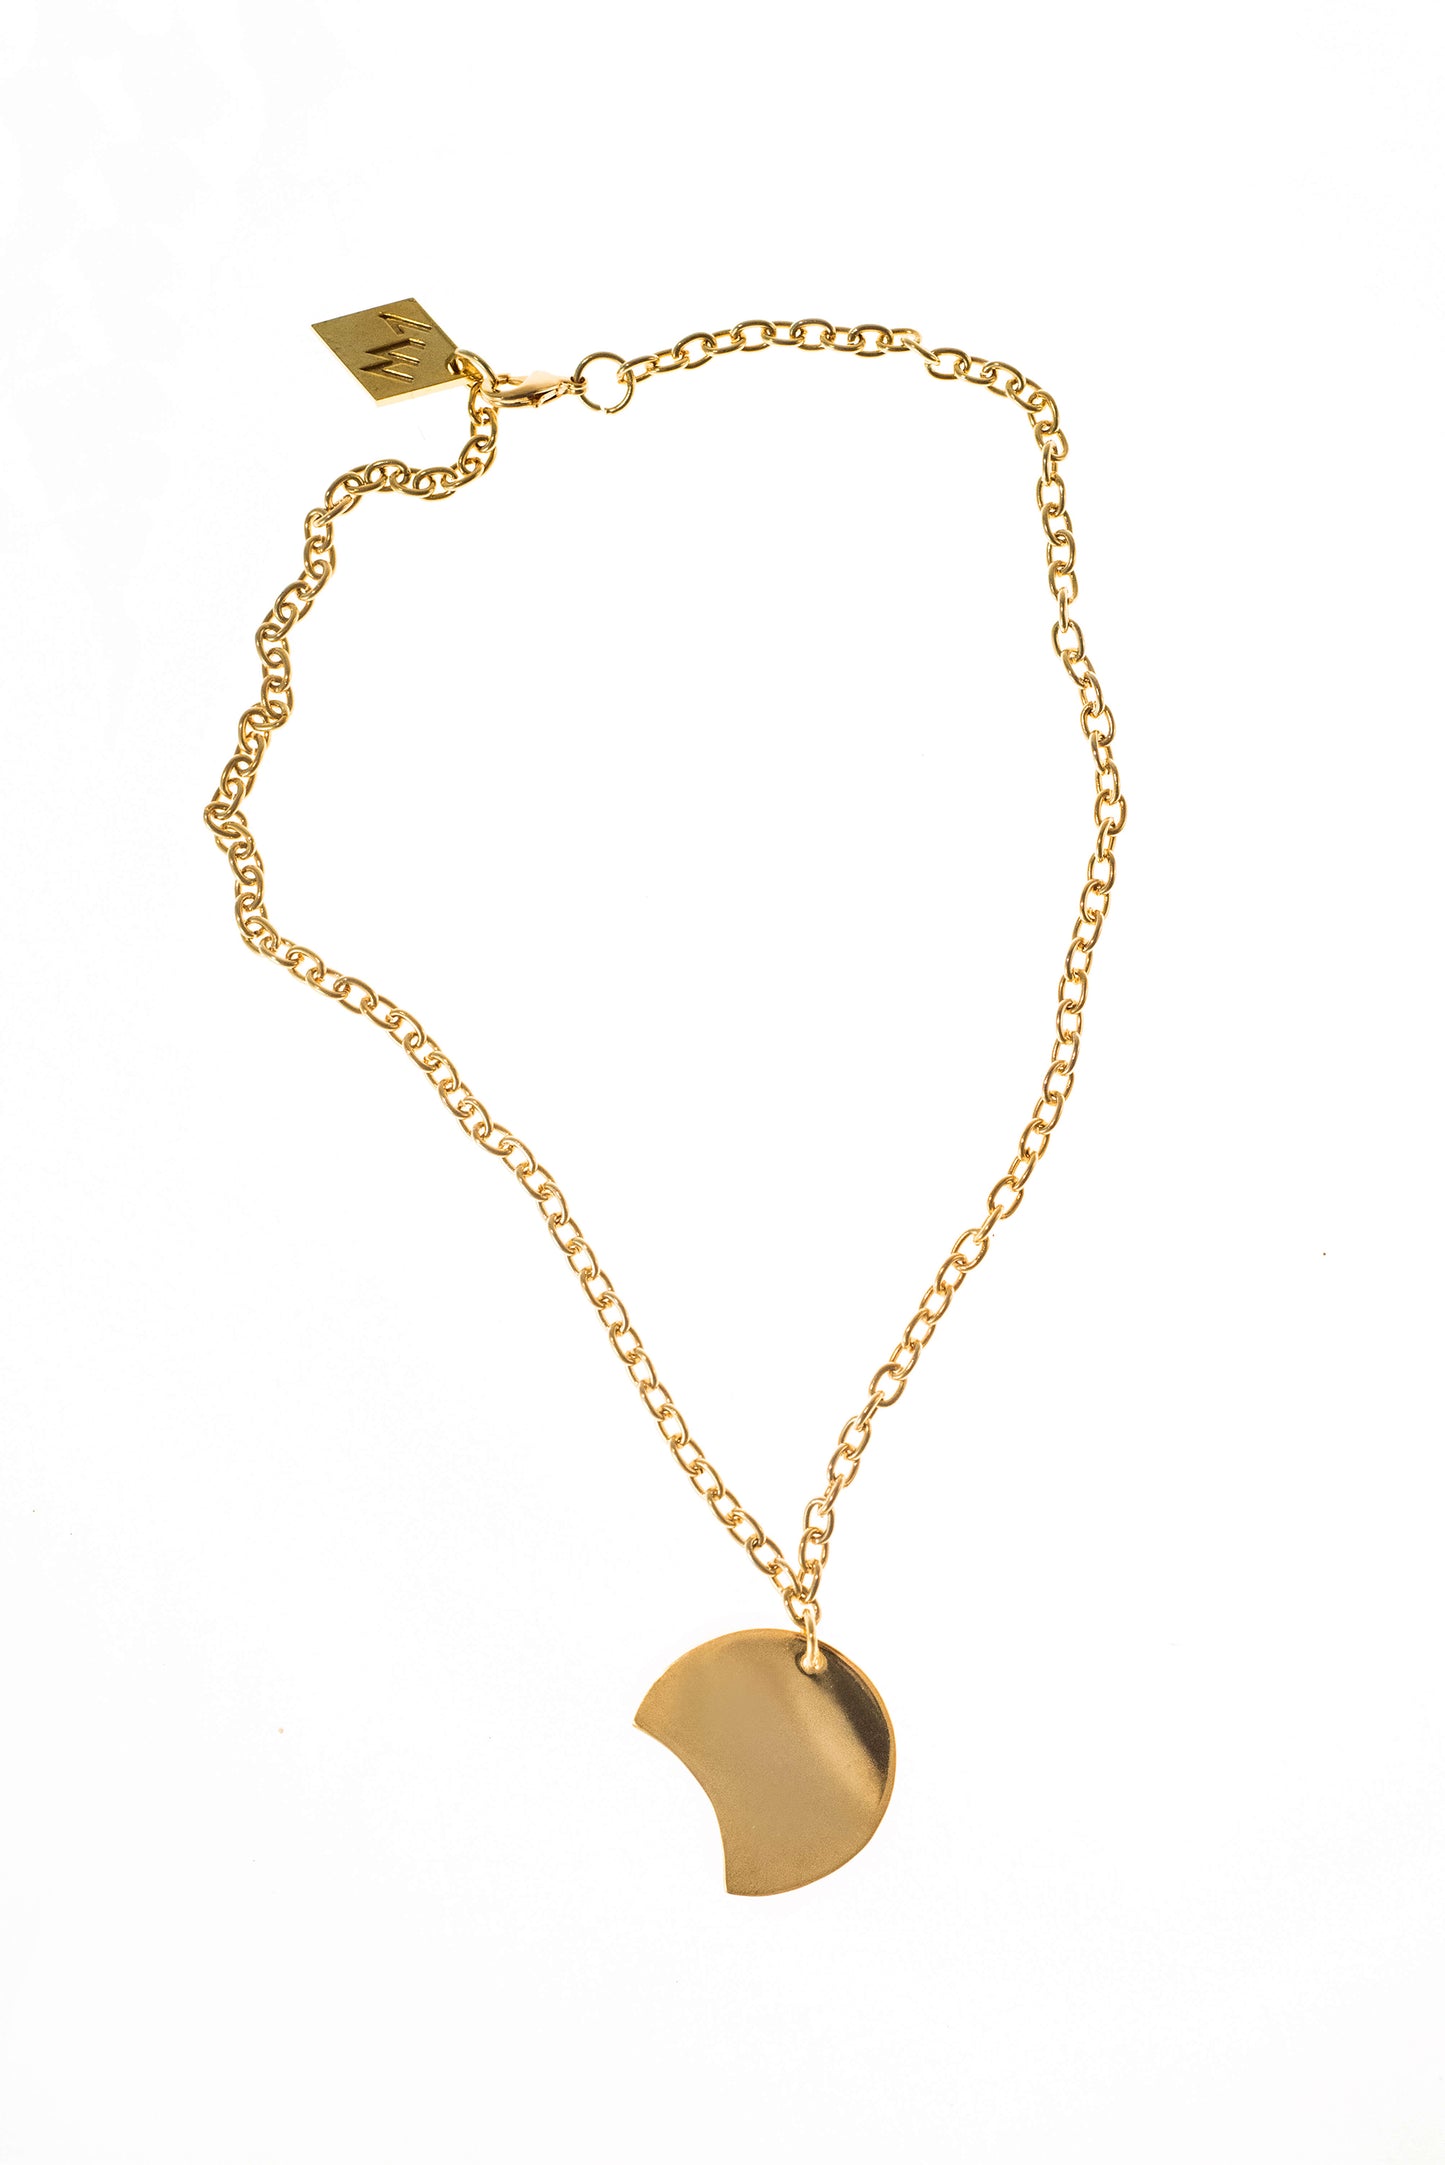 Necklace made of hand cut and 24K gold-plated brass and anchor chain.